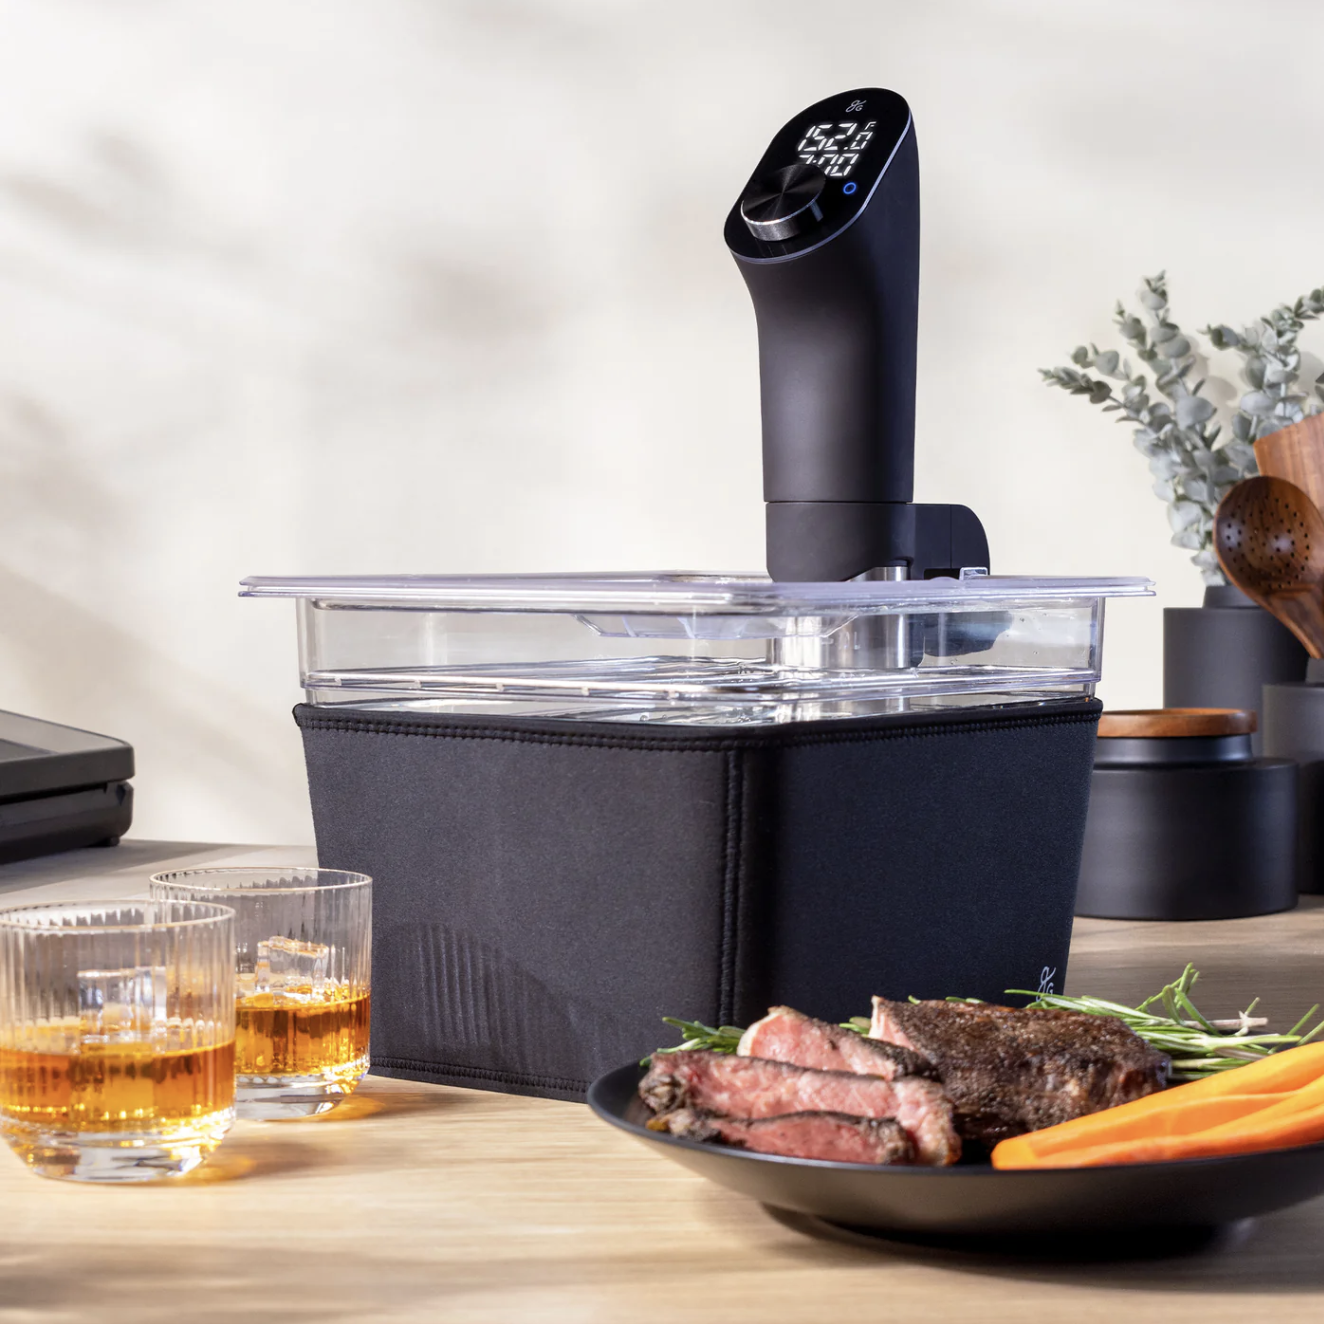 Anova unveils new reusable silicone bags to promote eco-friendly sous vide  cooking